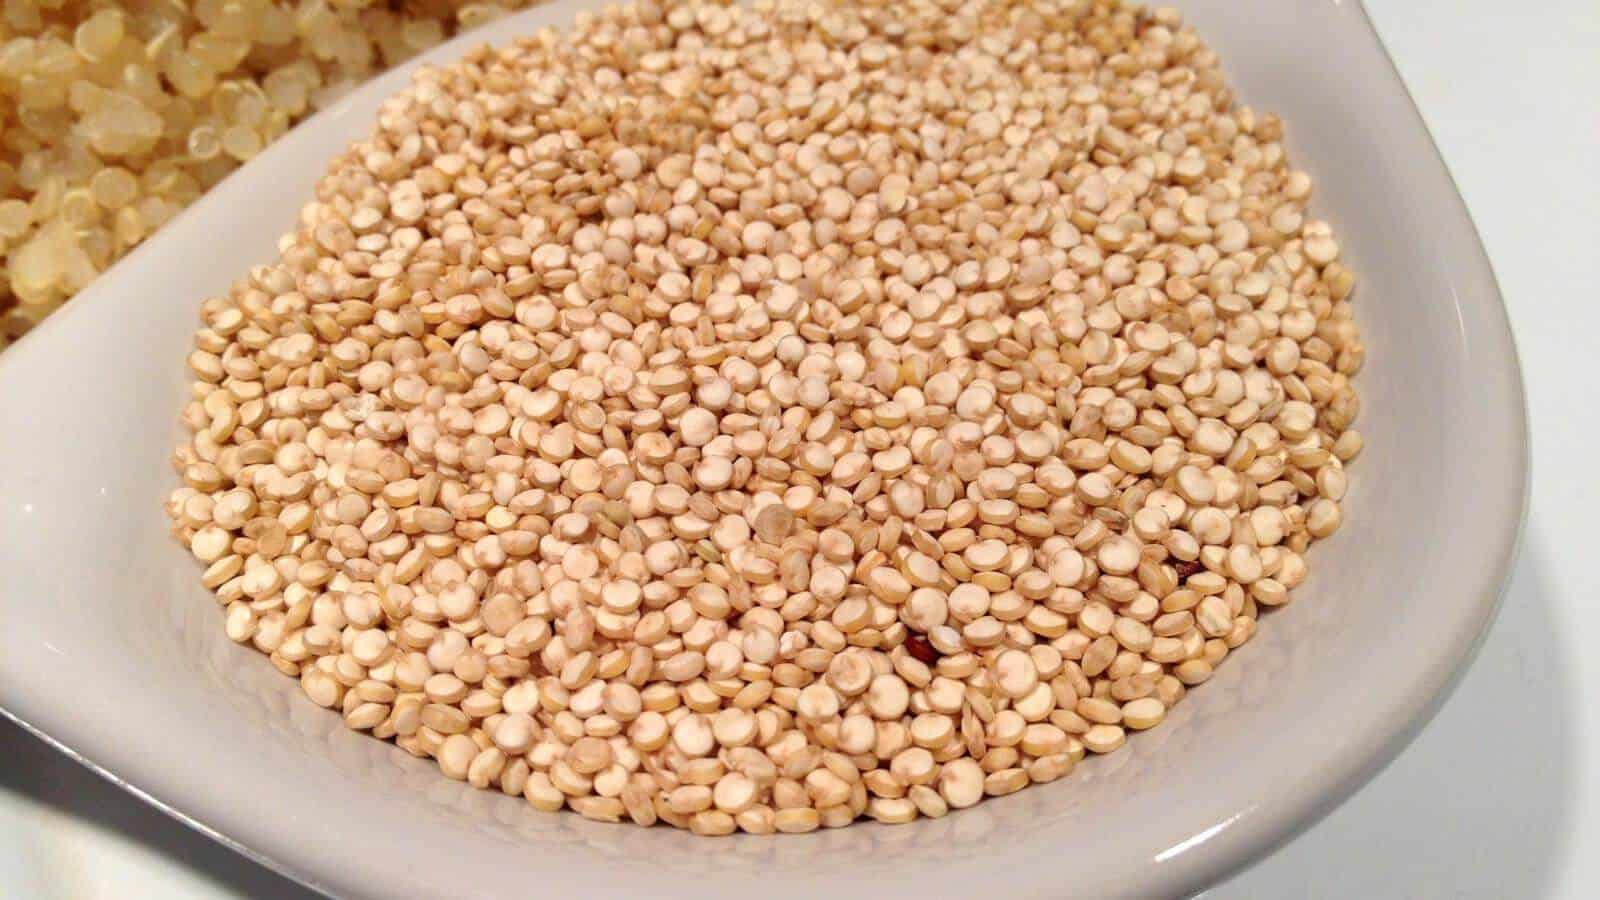 A big bowl filled with uncooked quinoa.